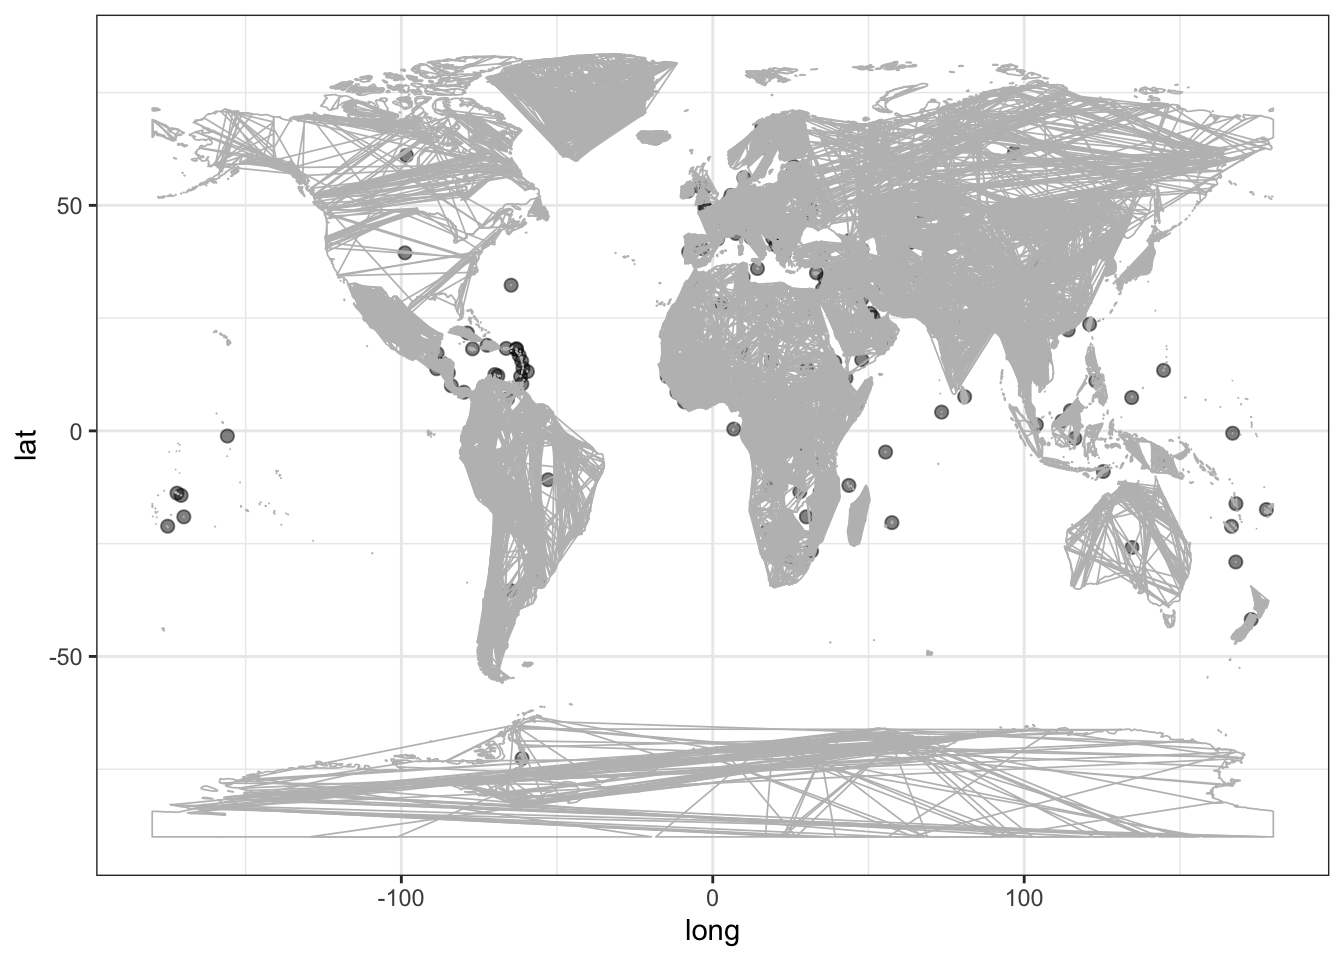 Locations of the vertices described by CountryCentroids. Another layer shows country boundaries.